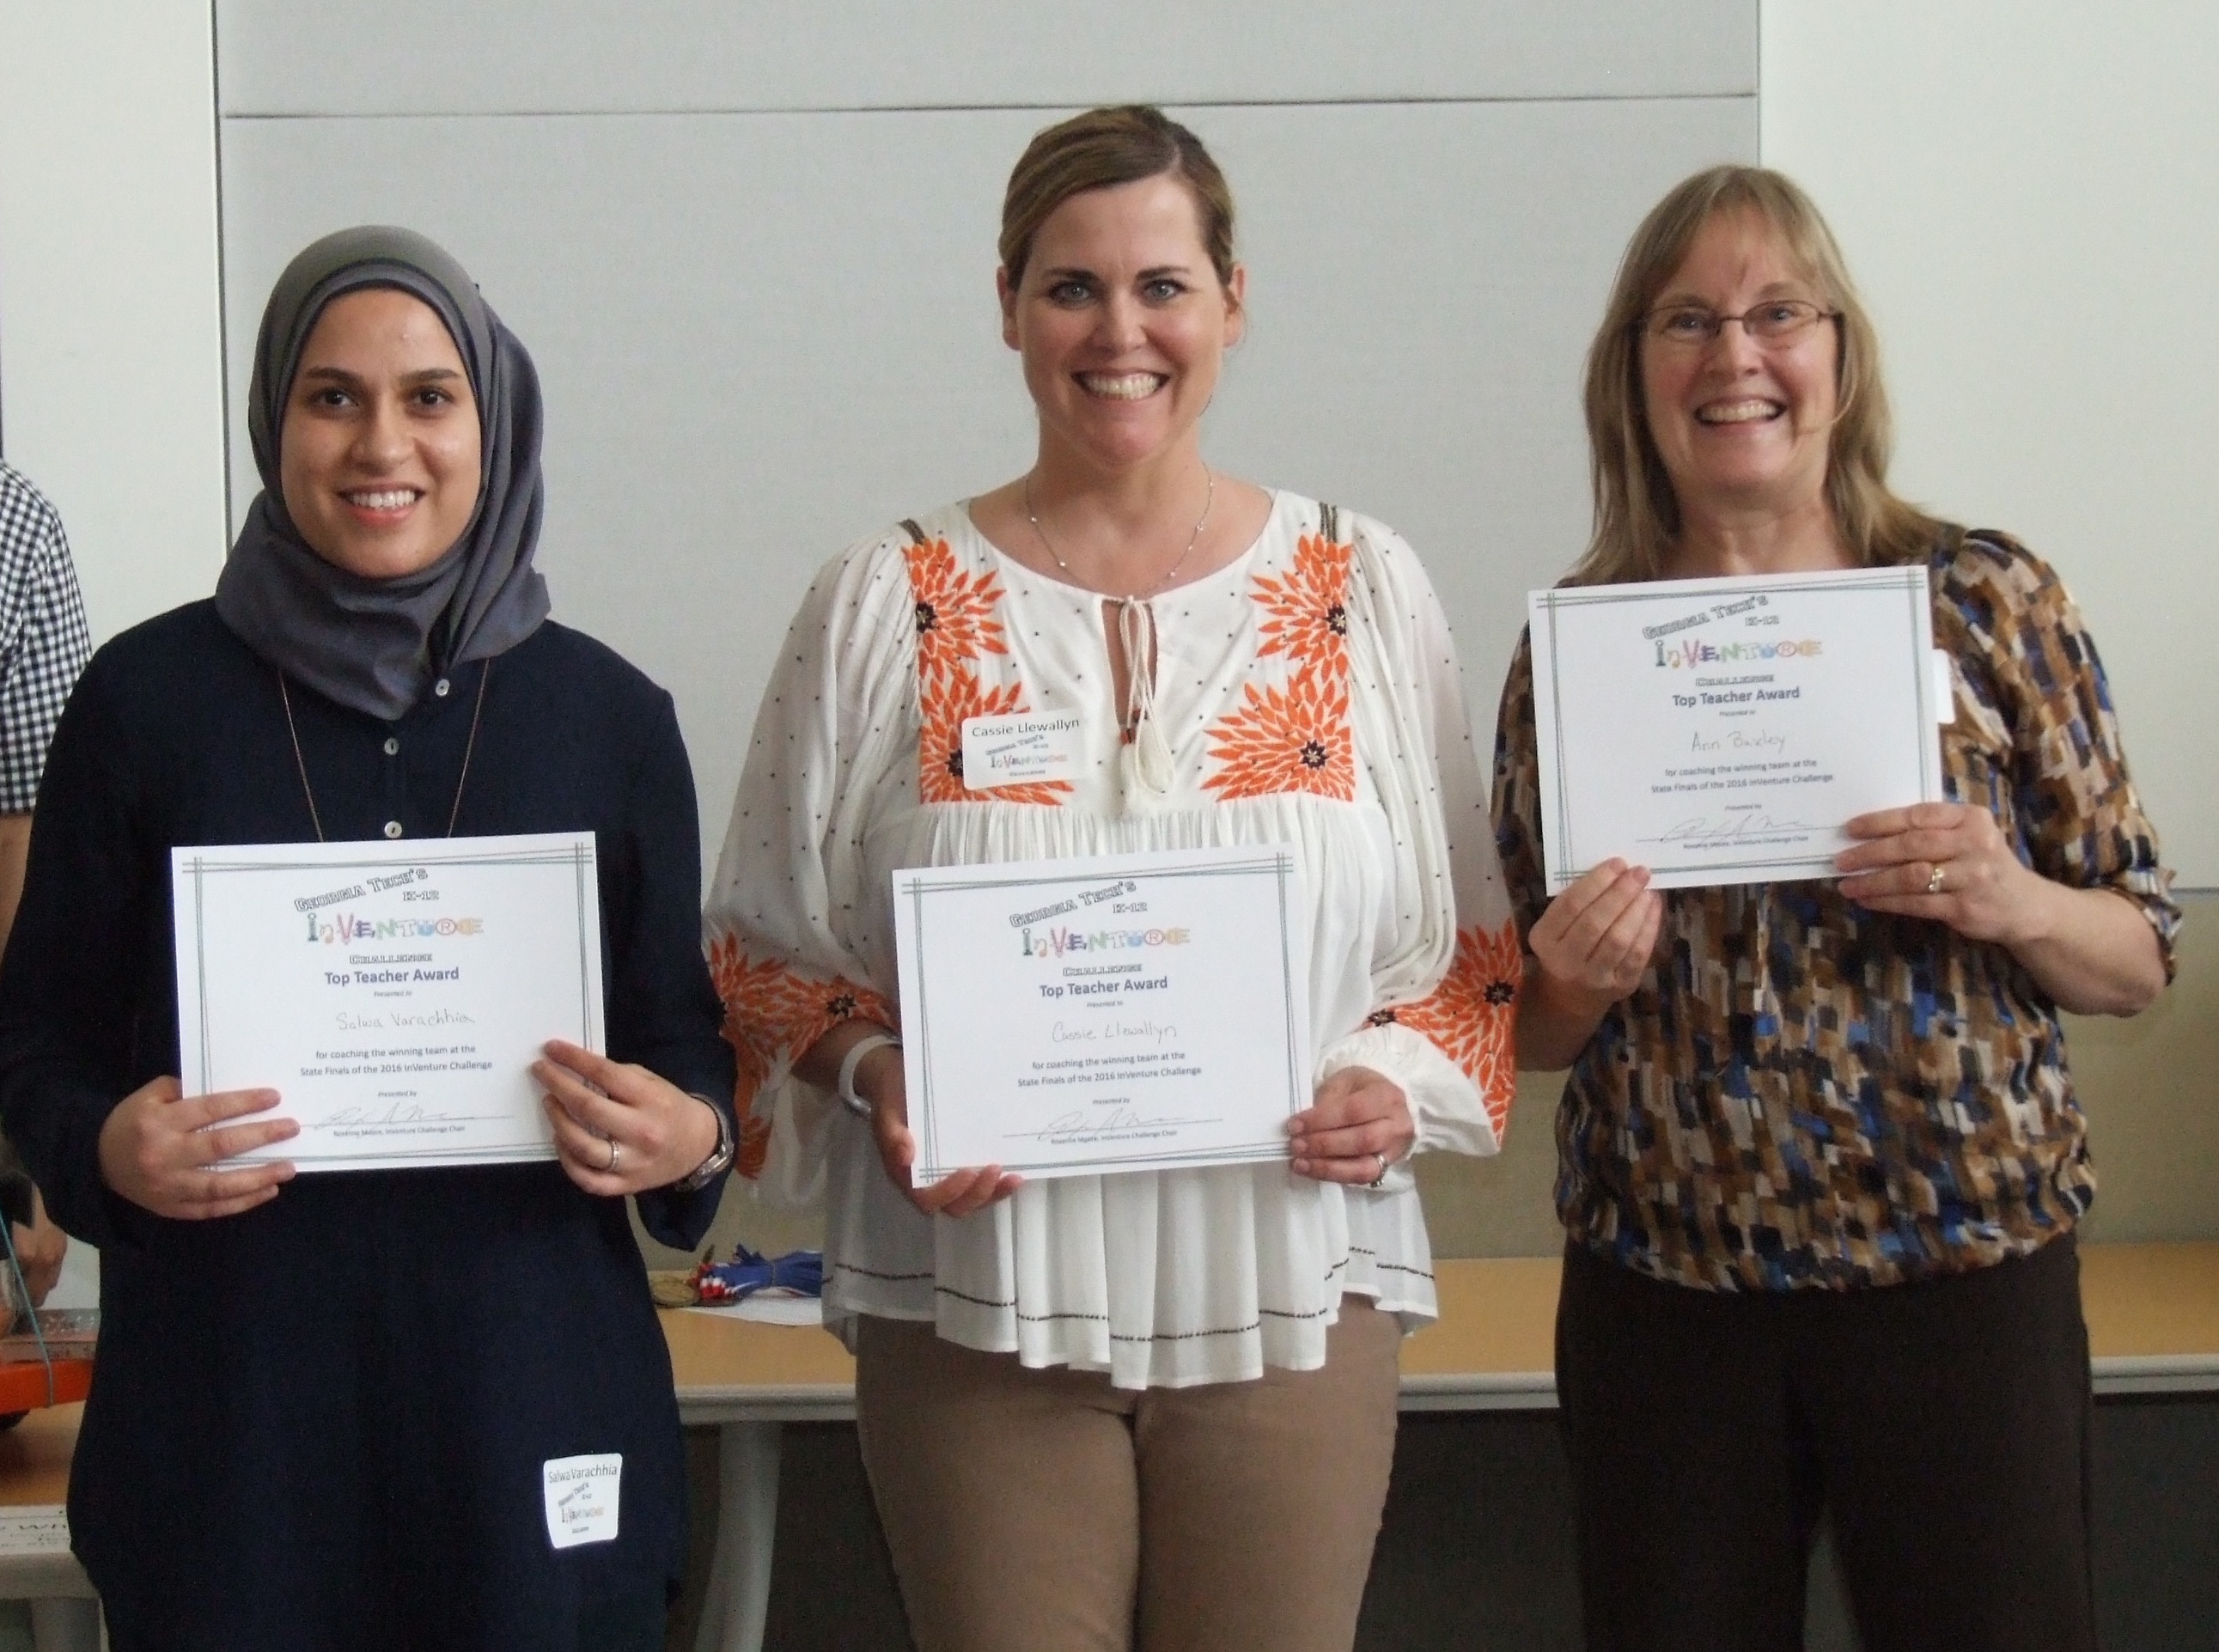 1st Place TeachersThe teachers (3) of the first place elementary, middle, and high school teams Ann Baxley (Walton High School), Salwa Varachhia (Amana Academy), Cassie Llewallyn (Pickett’s Mill Elementary) were recognized with a special certificate.